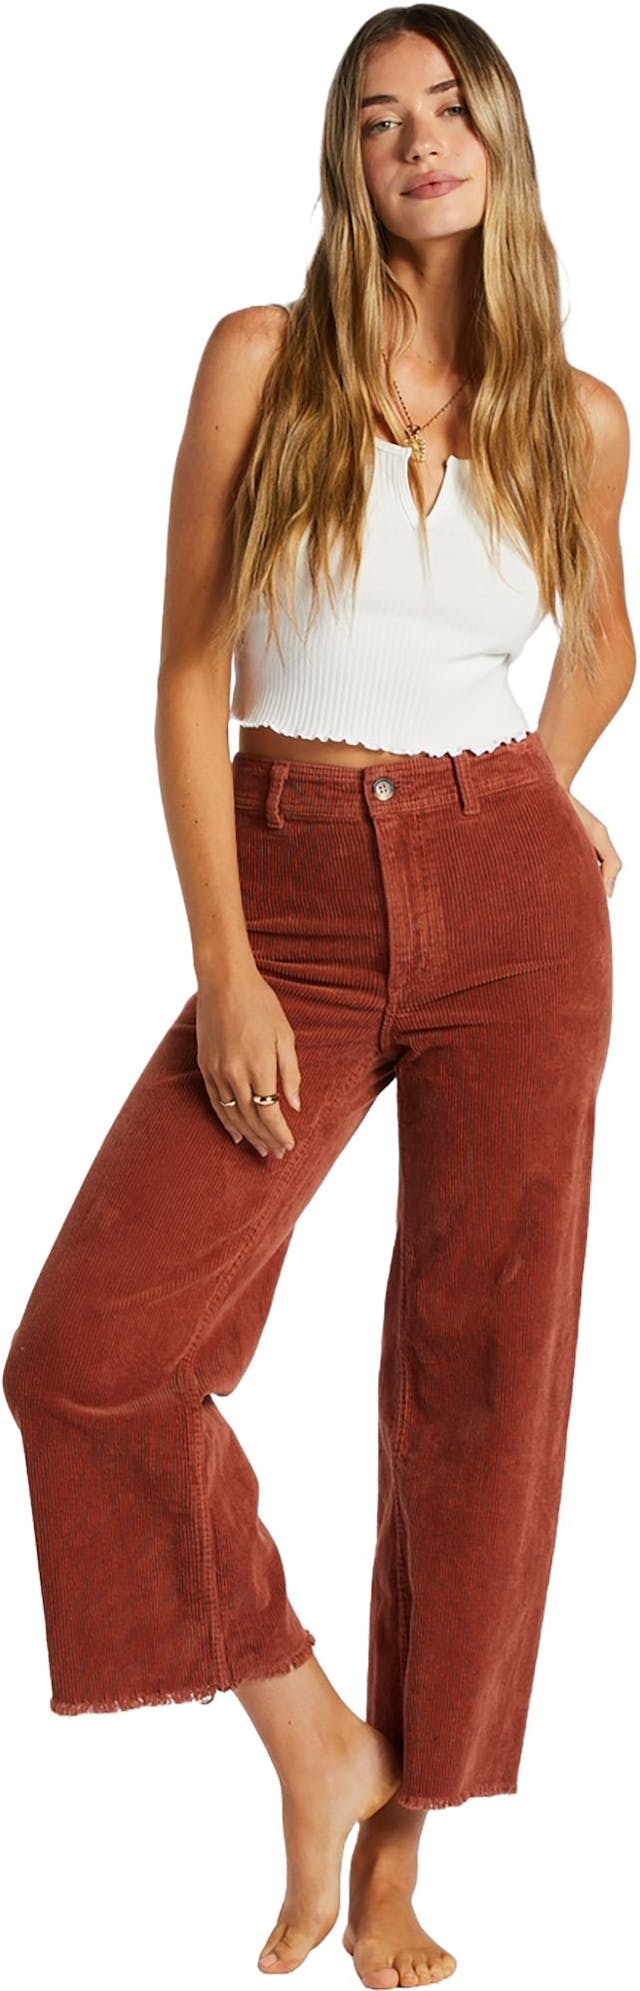 Product image for Free Fall Cord Pant - Women's